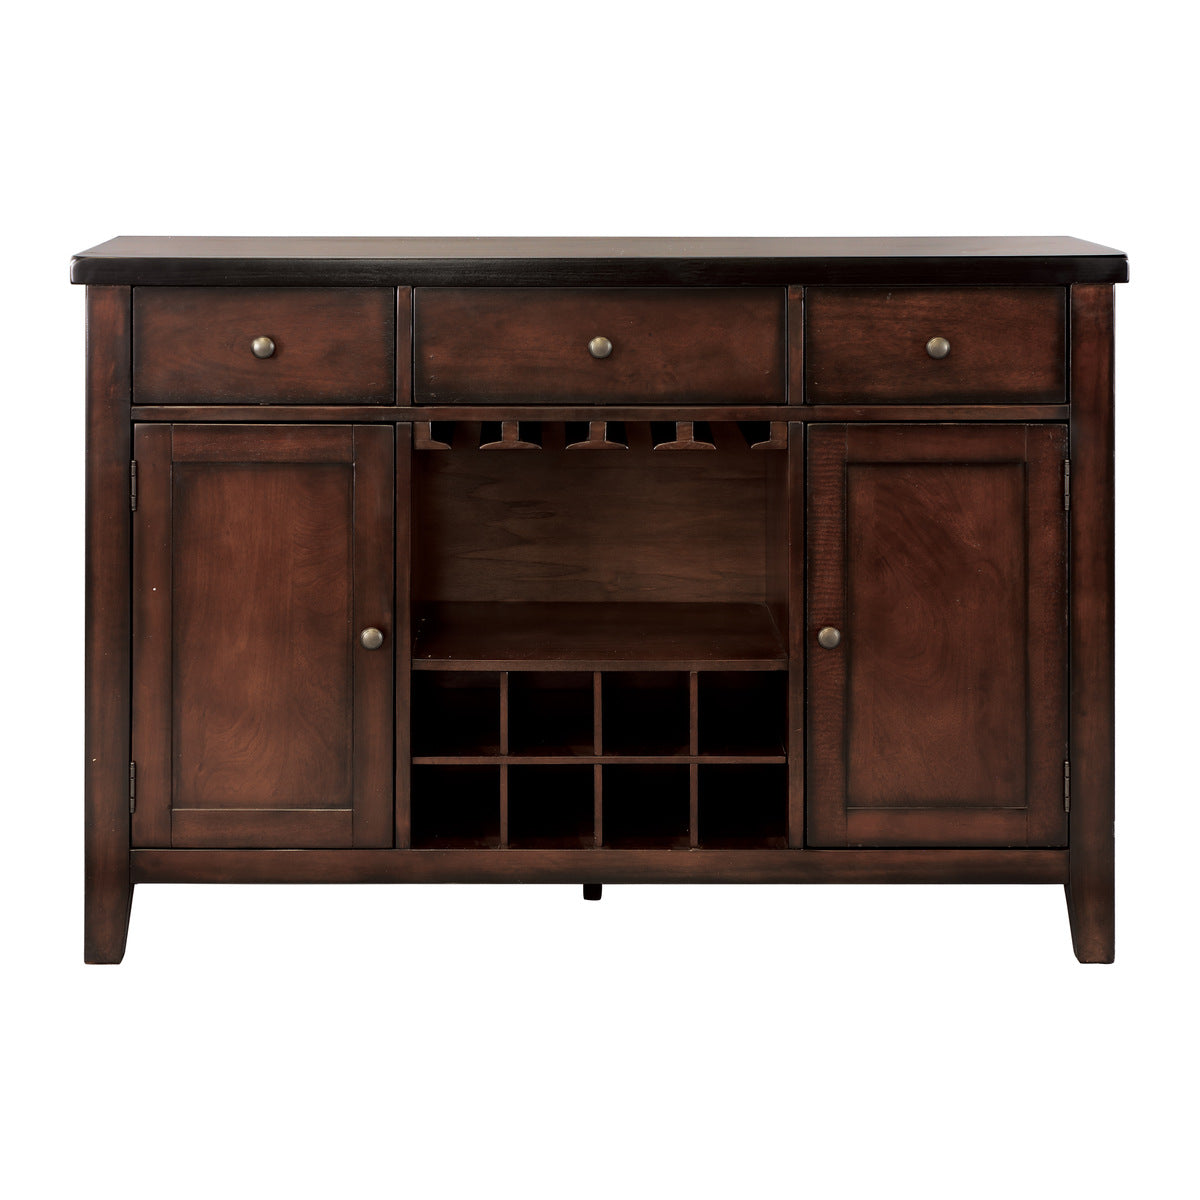 Mantello Counter Height Dining Collection 5547-36